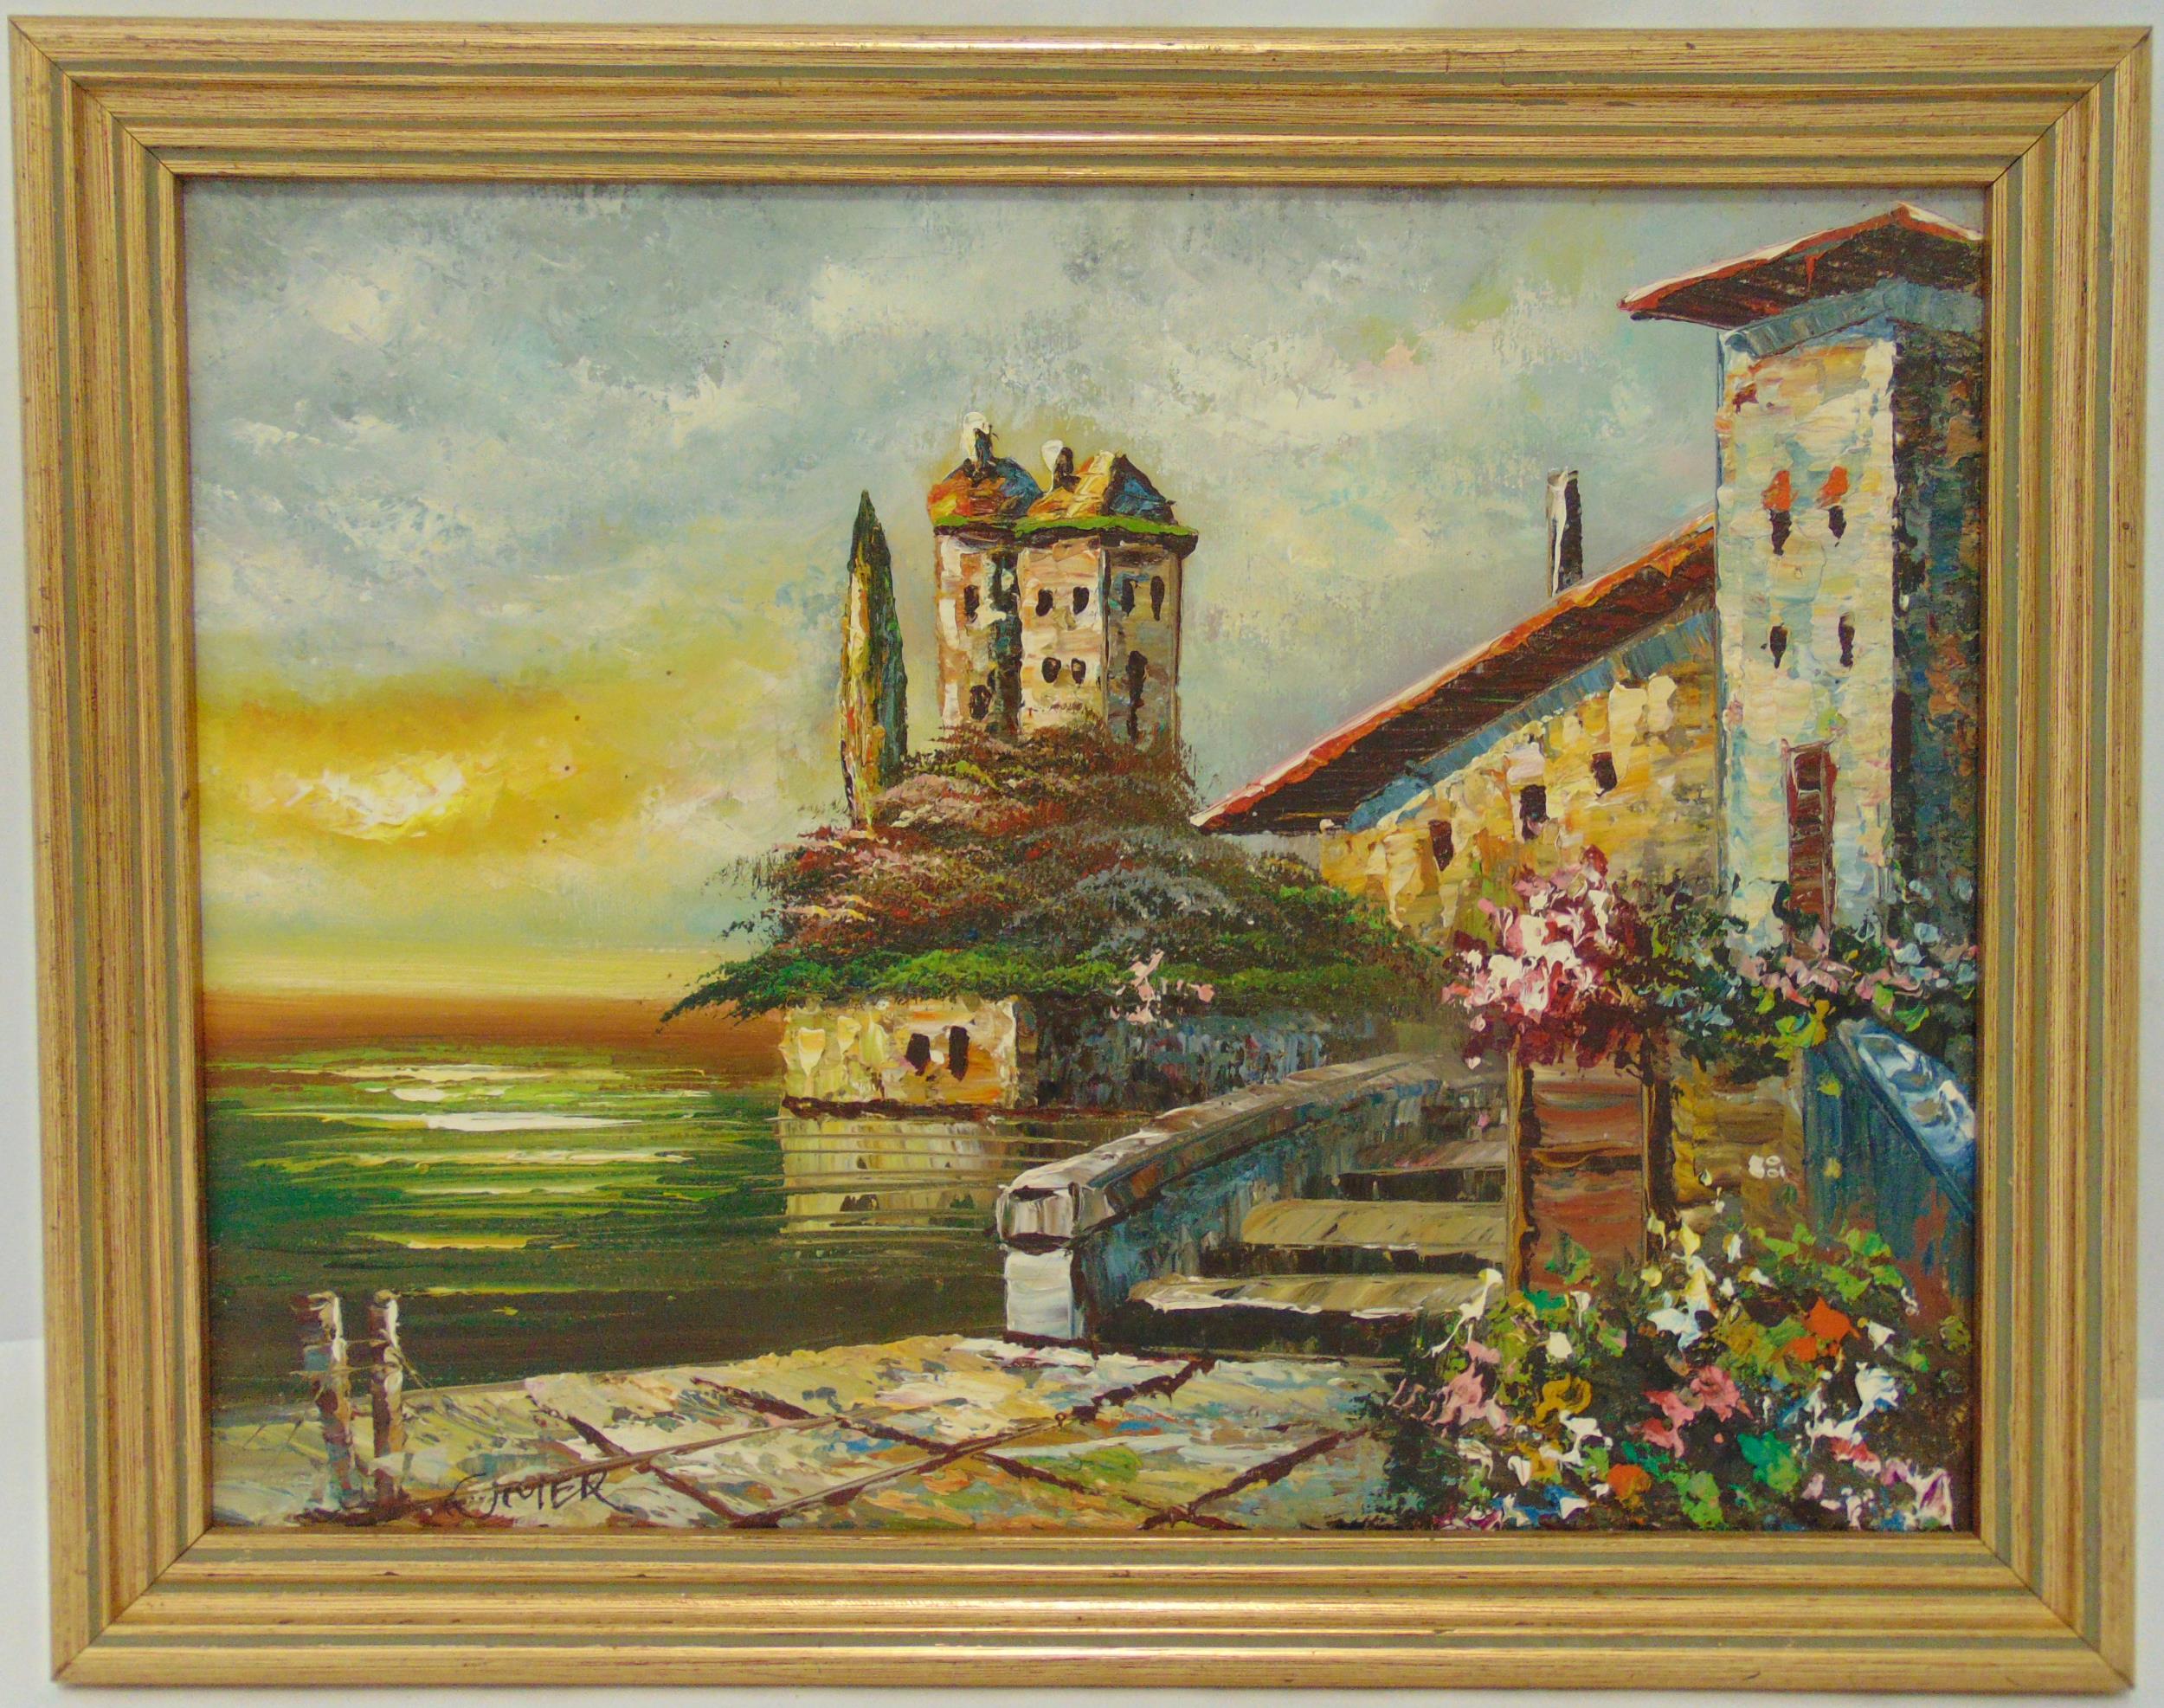 Omer framed oil on canvas of a continental waterside house and garden, signed bottom left, 31 x